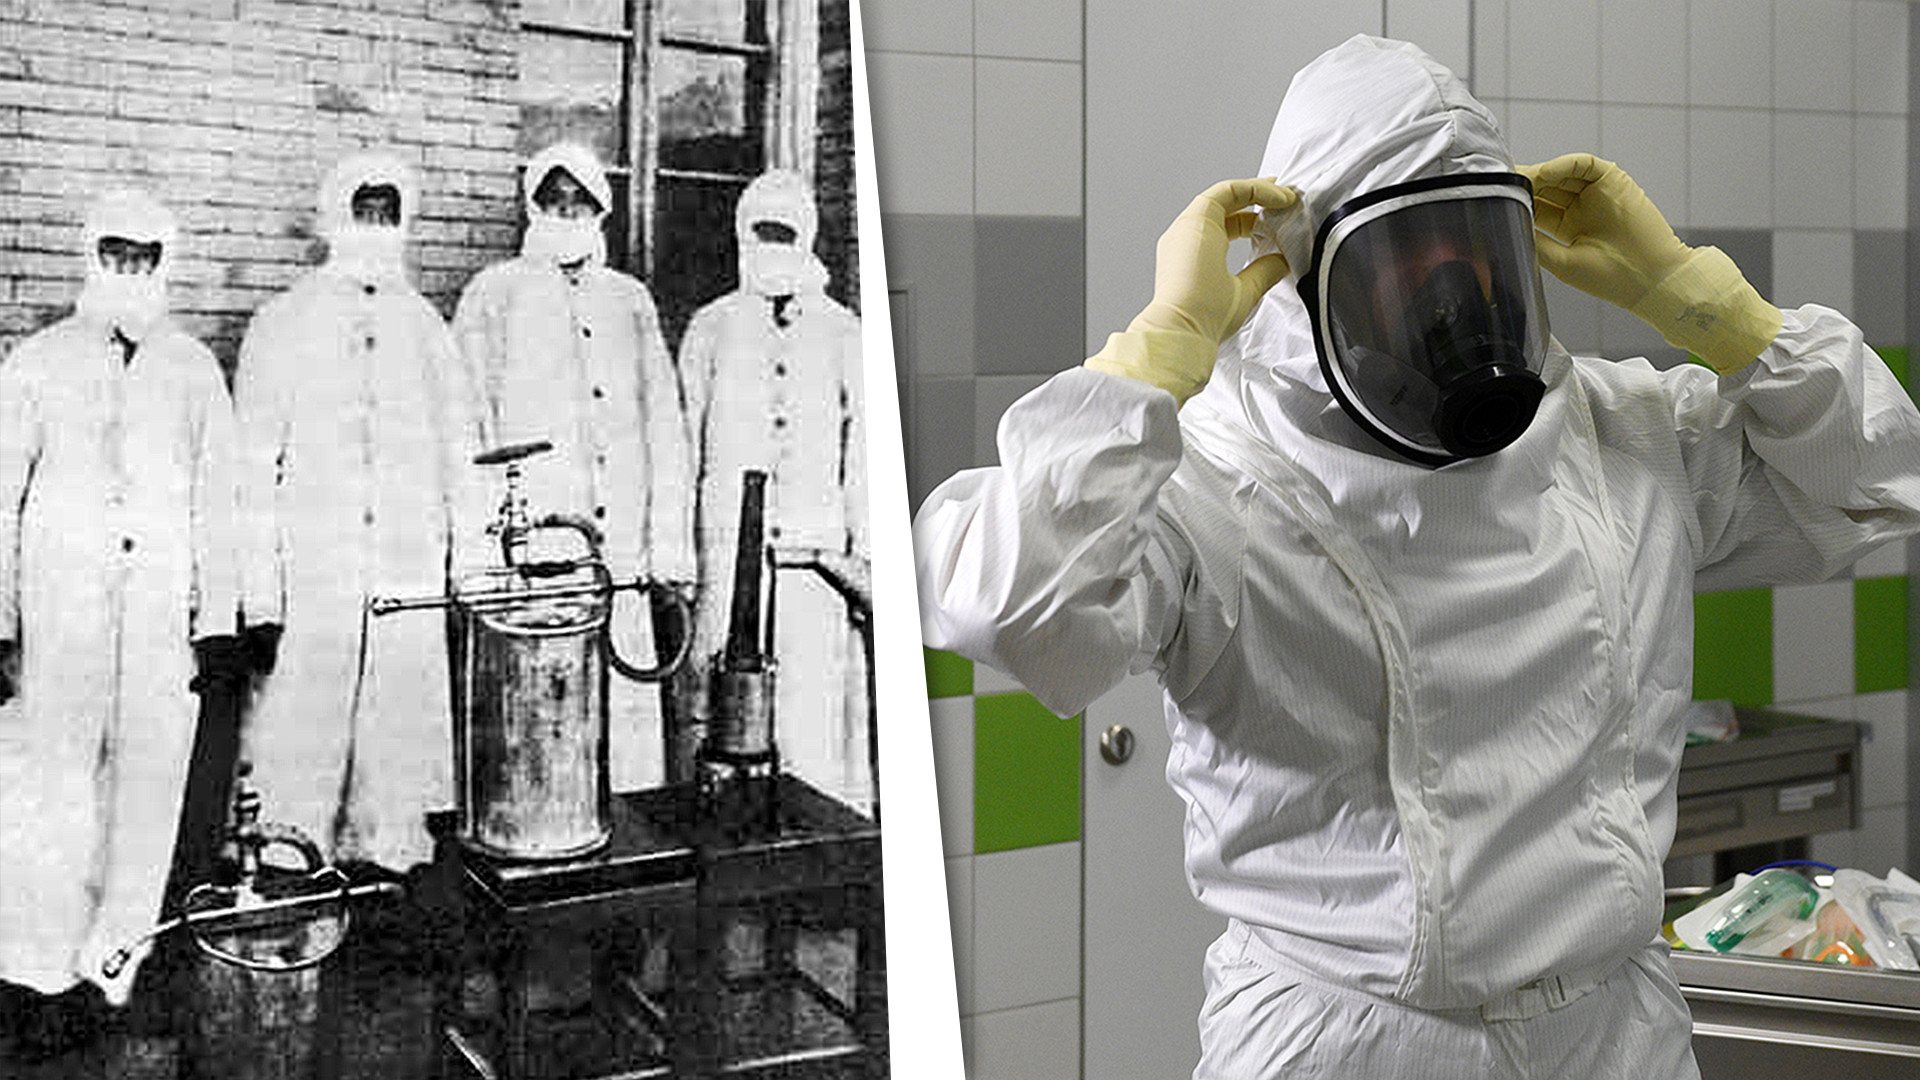 Evolution of biological protection suits from the 17th century to today  (PHOTOS) - Russia Beyond